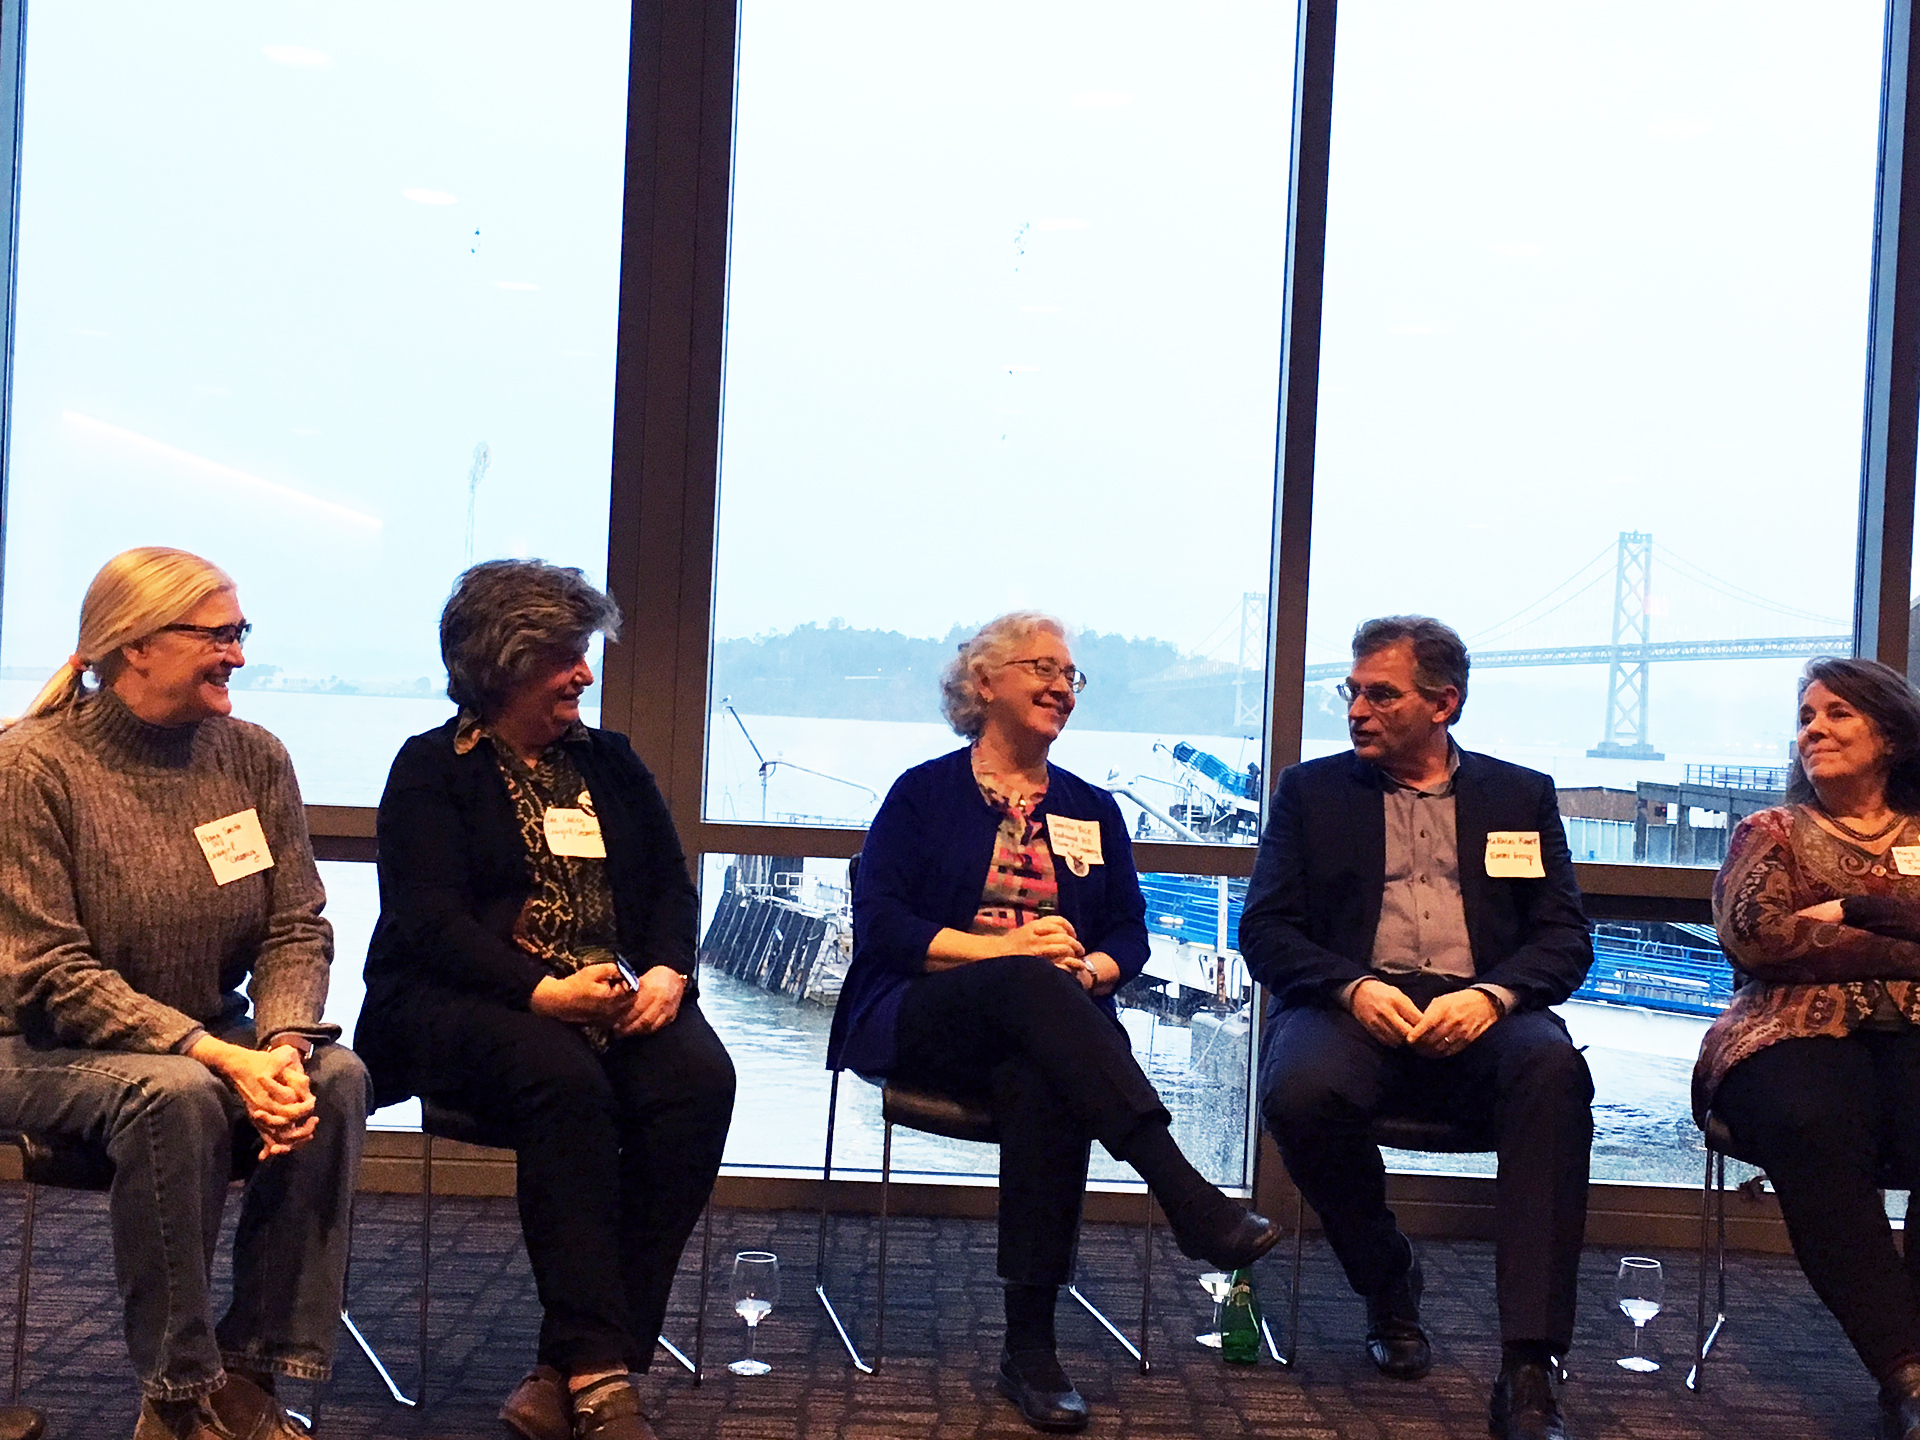 From left: Peggy Smith (Cowgirl Creamery), Sue Conley (Cowgirl Creamery), Jennifer Bice (Redwood Hill), Matthias Kunz (Emmi), and Mary Keehn (Cypress Grove) in the Port Room of the San Francisco Ferry Building.